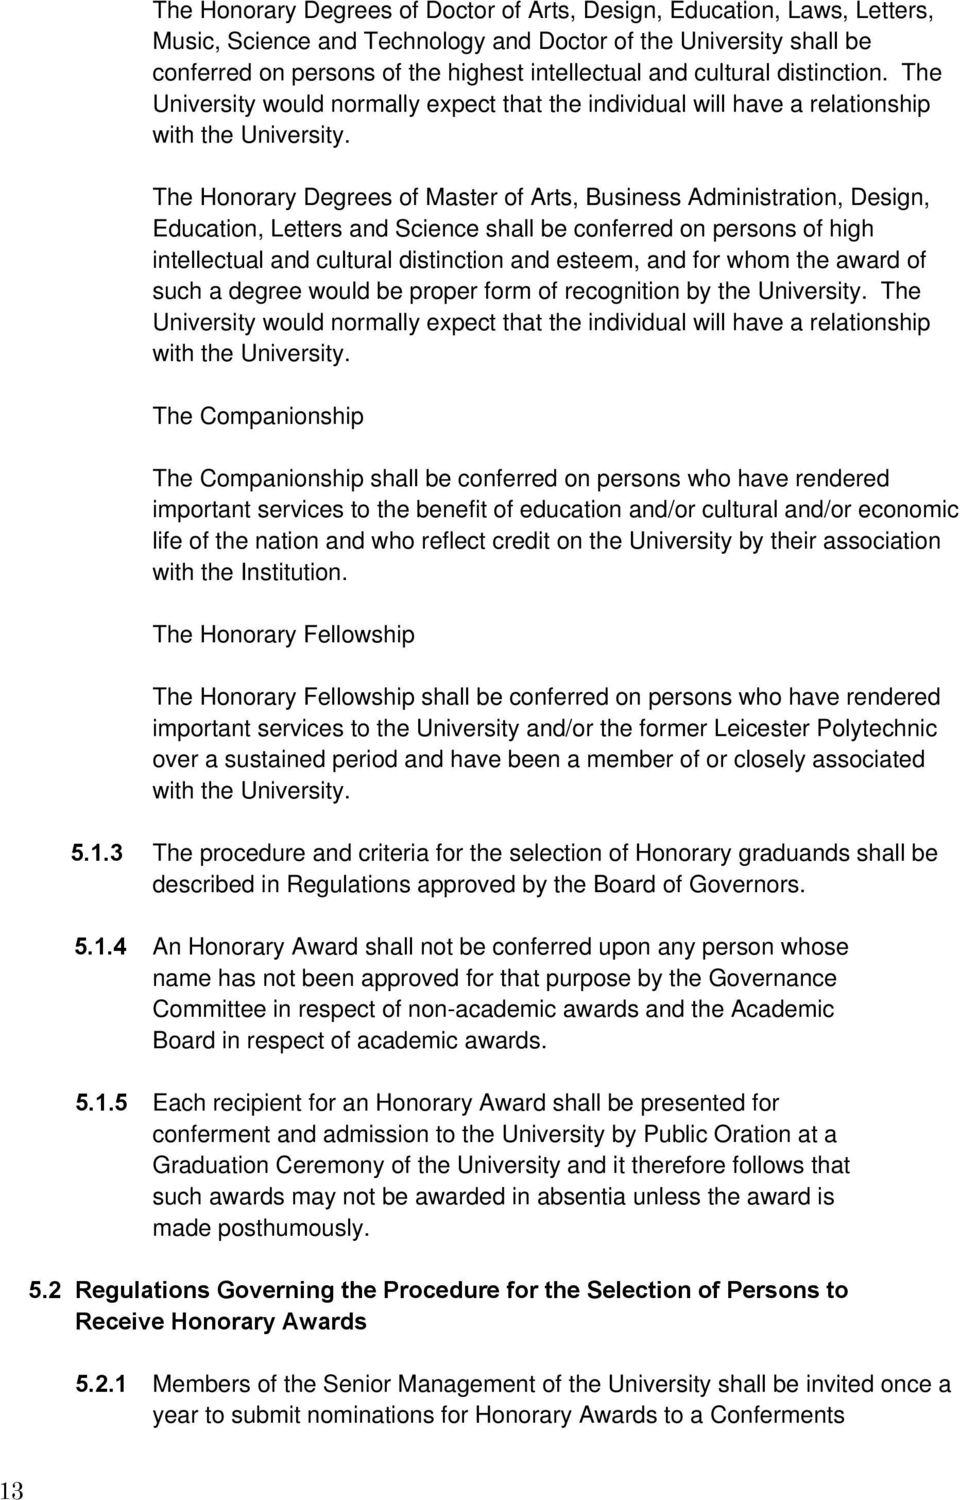 The Honorary Degrees of Master of Arts, Business Administration, Design, Education, Letters and Science shall be conferred on persons of high intellectual and cultural distinction and esteem, and for